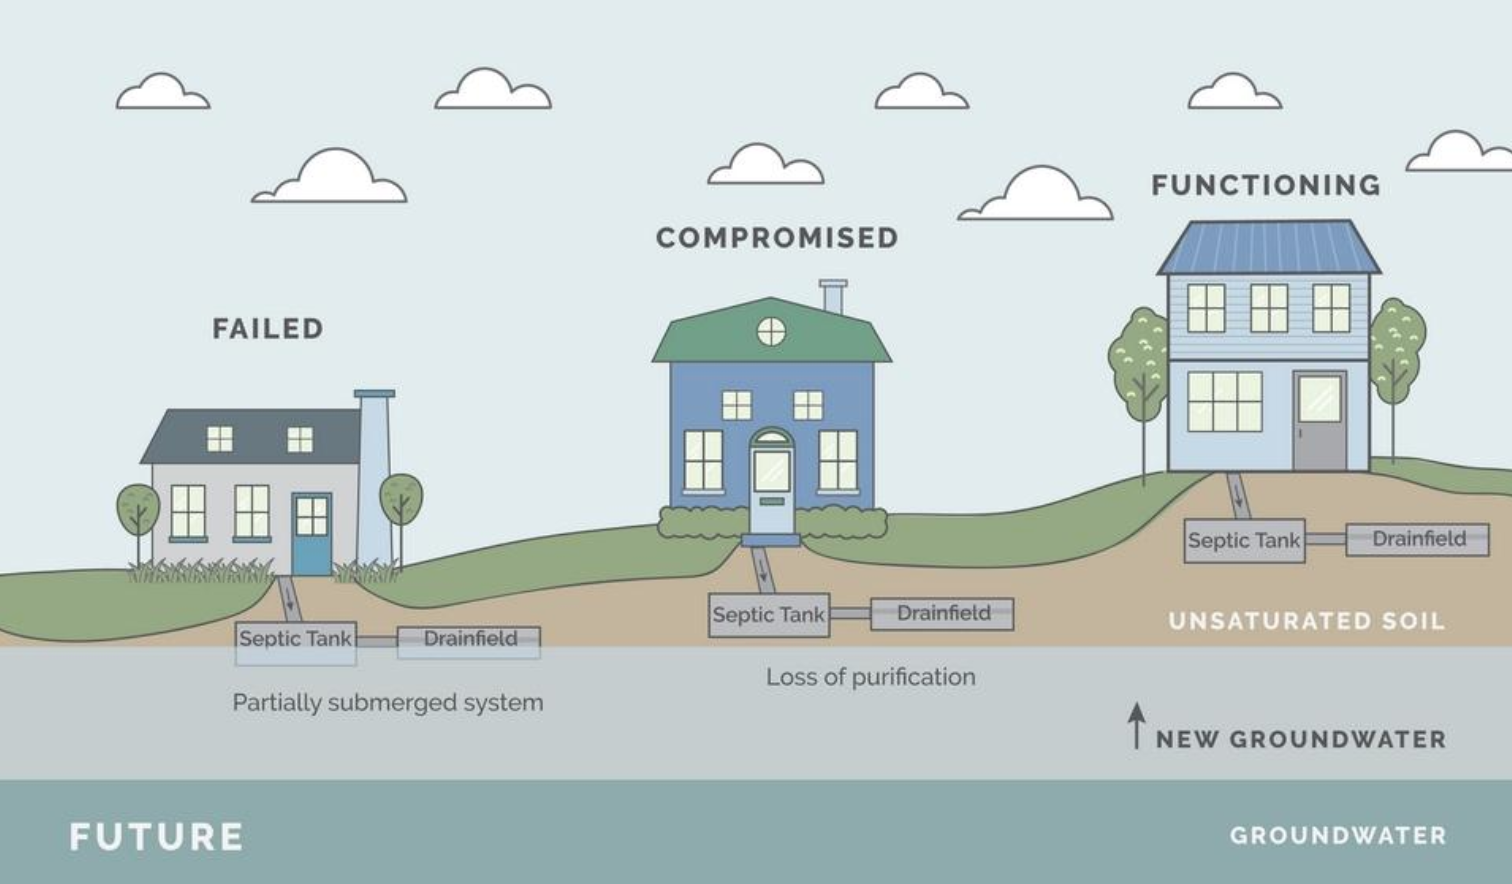 The graphic depicts how sea level rise can imperil the functioning of septic systems by raising groundwater. Some systems will be impaired without owners realizing it. Georgia has mapped the location of coastal septic systems so researchers and local governments can model and address the most at-risk systems. Graphic courtesy of UGA Carl Vinson Institute of Government.